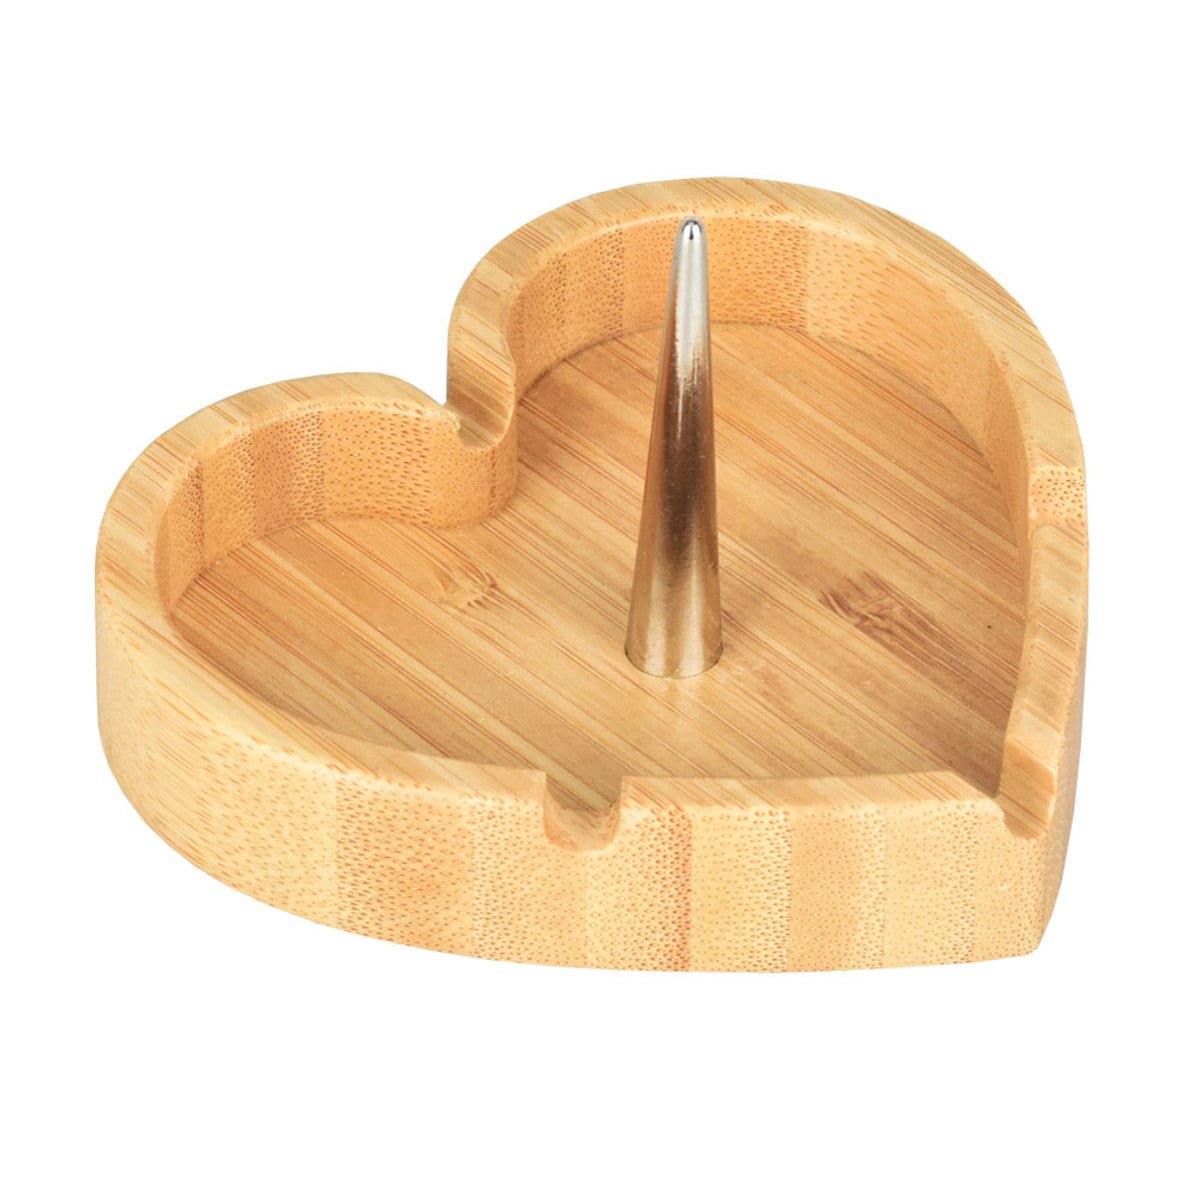 Heart Spiked Bamboo Ash Tray - Glasss Station